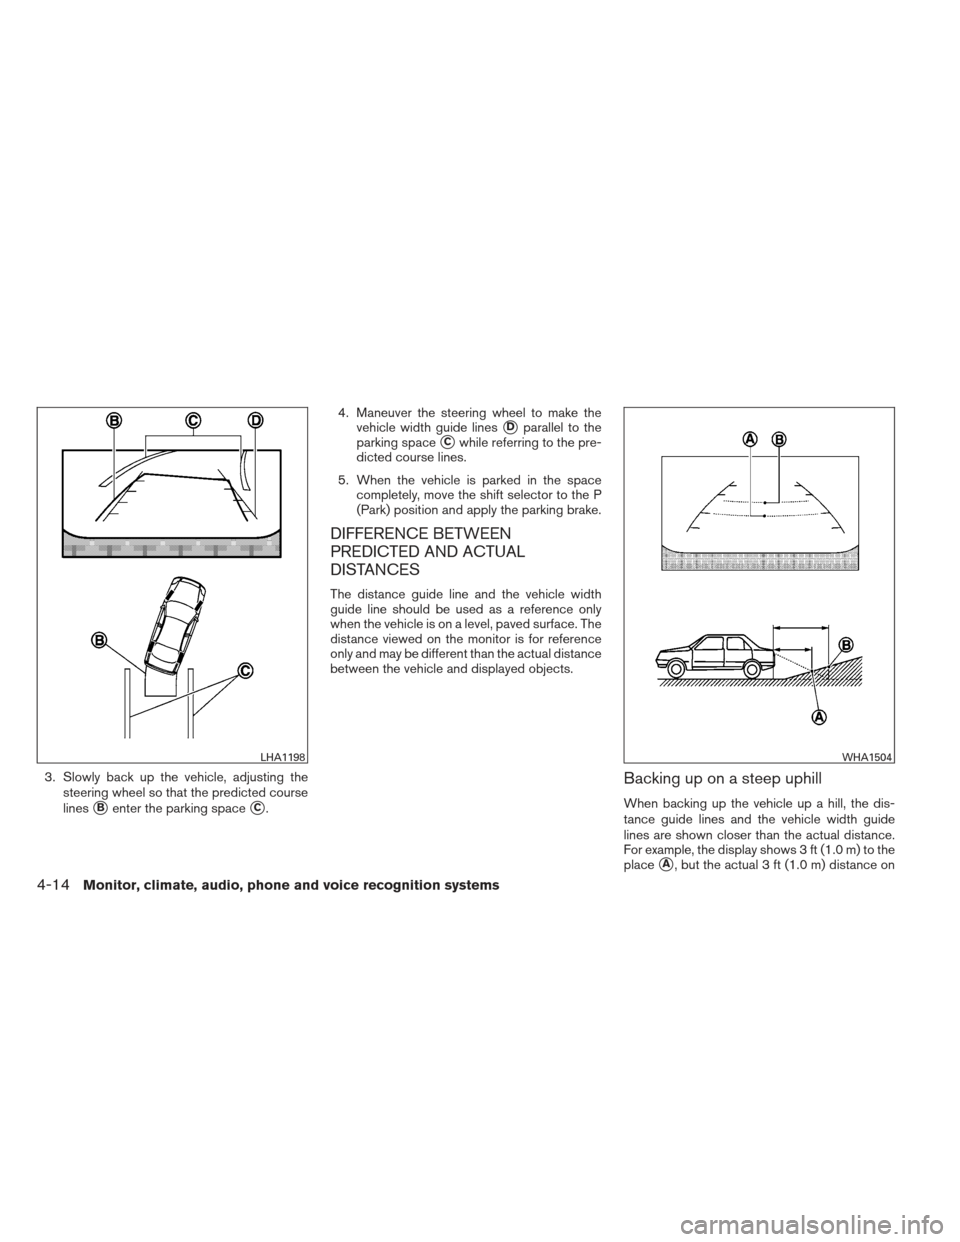 NISSAN ALTIMA 2013 L33 / 5.G Owners Manual 3. Slowly back up the vehicle, adjusting thesteering wheel so that the predicted course
lines
Benter the parking spaceC. 4. Maneuver the steering wheel to make the
vehicle width guide lines
Dparall